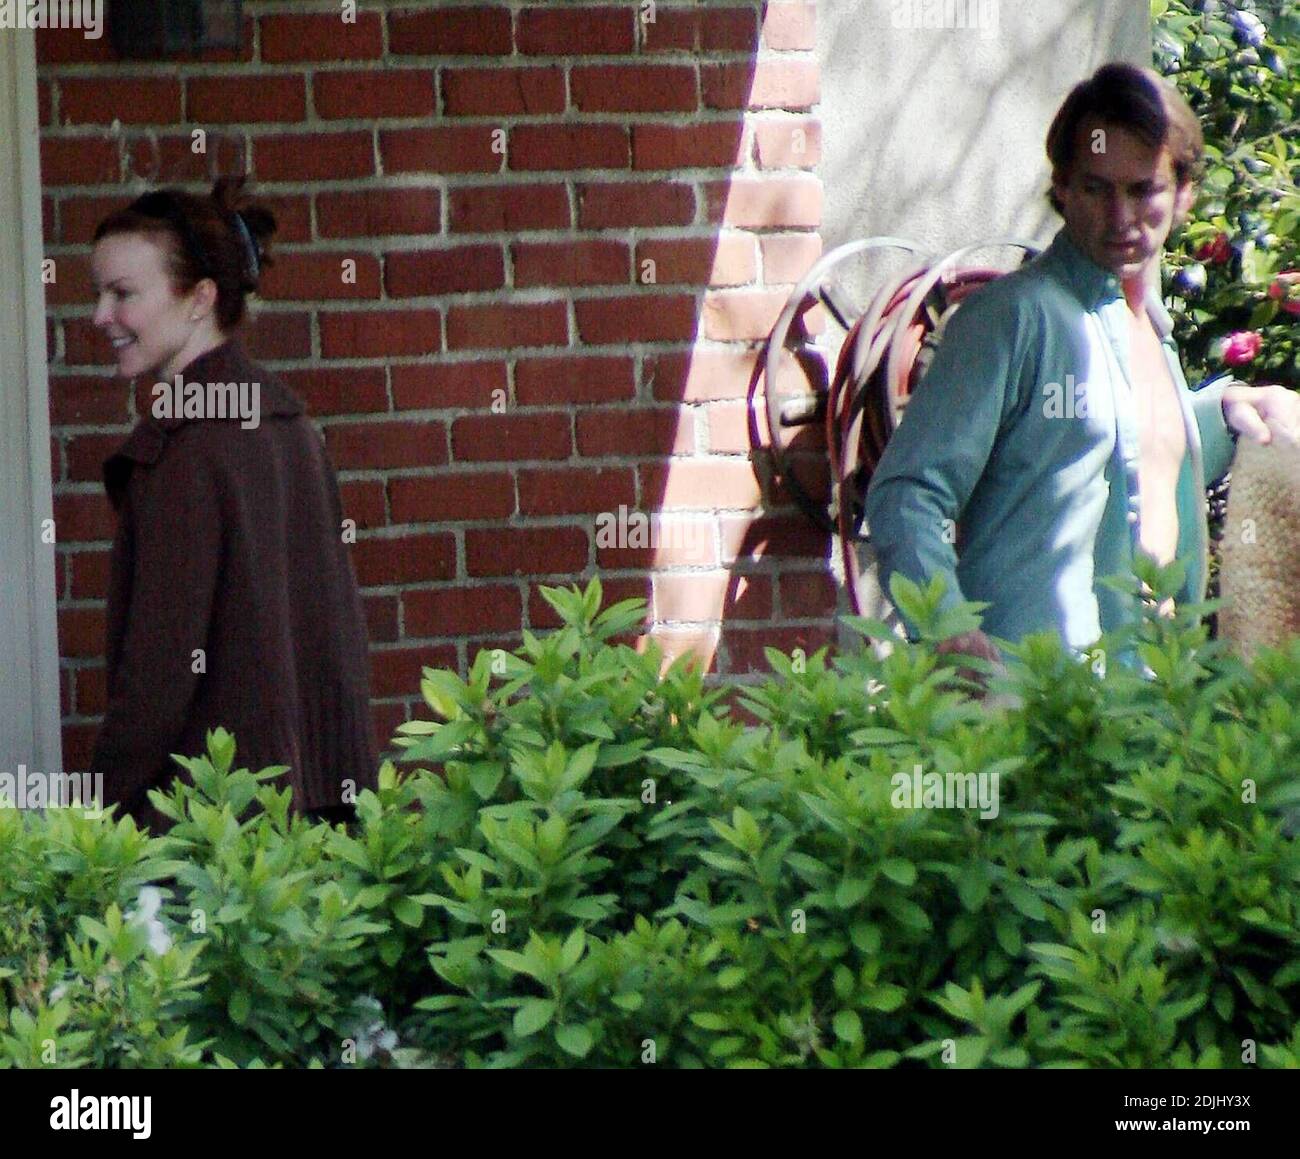 Exclusive!! Actress Marcia Cross seems to have borrowed an idea from her hit TV show 'Desperate Housewives' and hired a hunky gardener. 03/26/05 [[sac]] Stock Photo